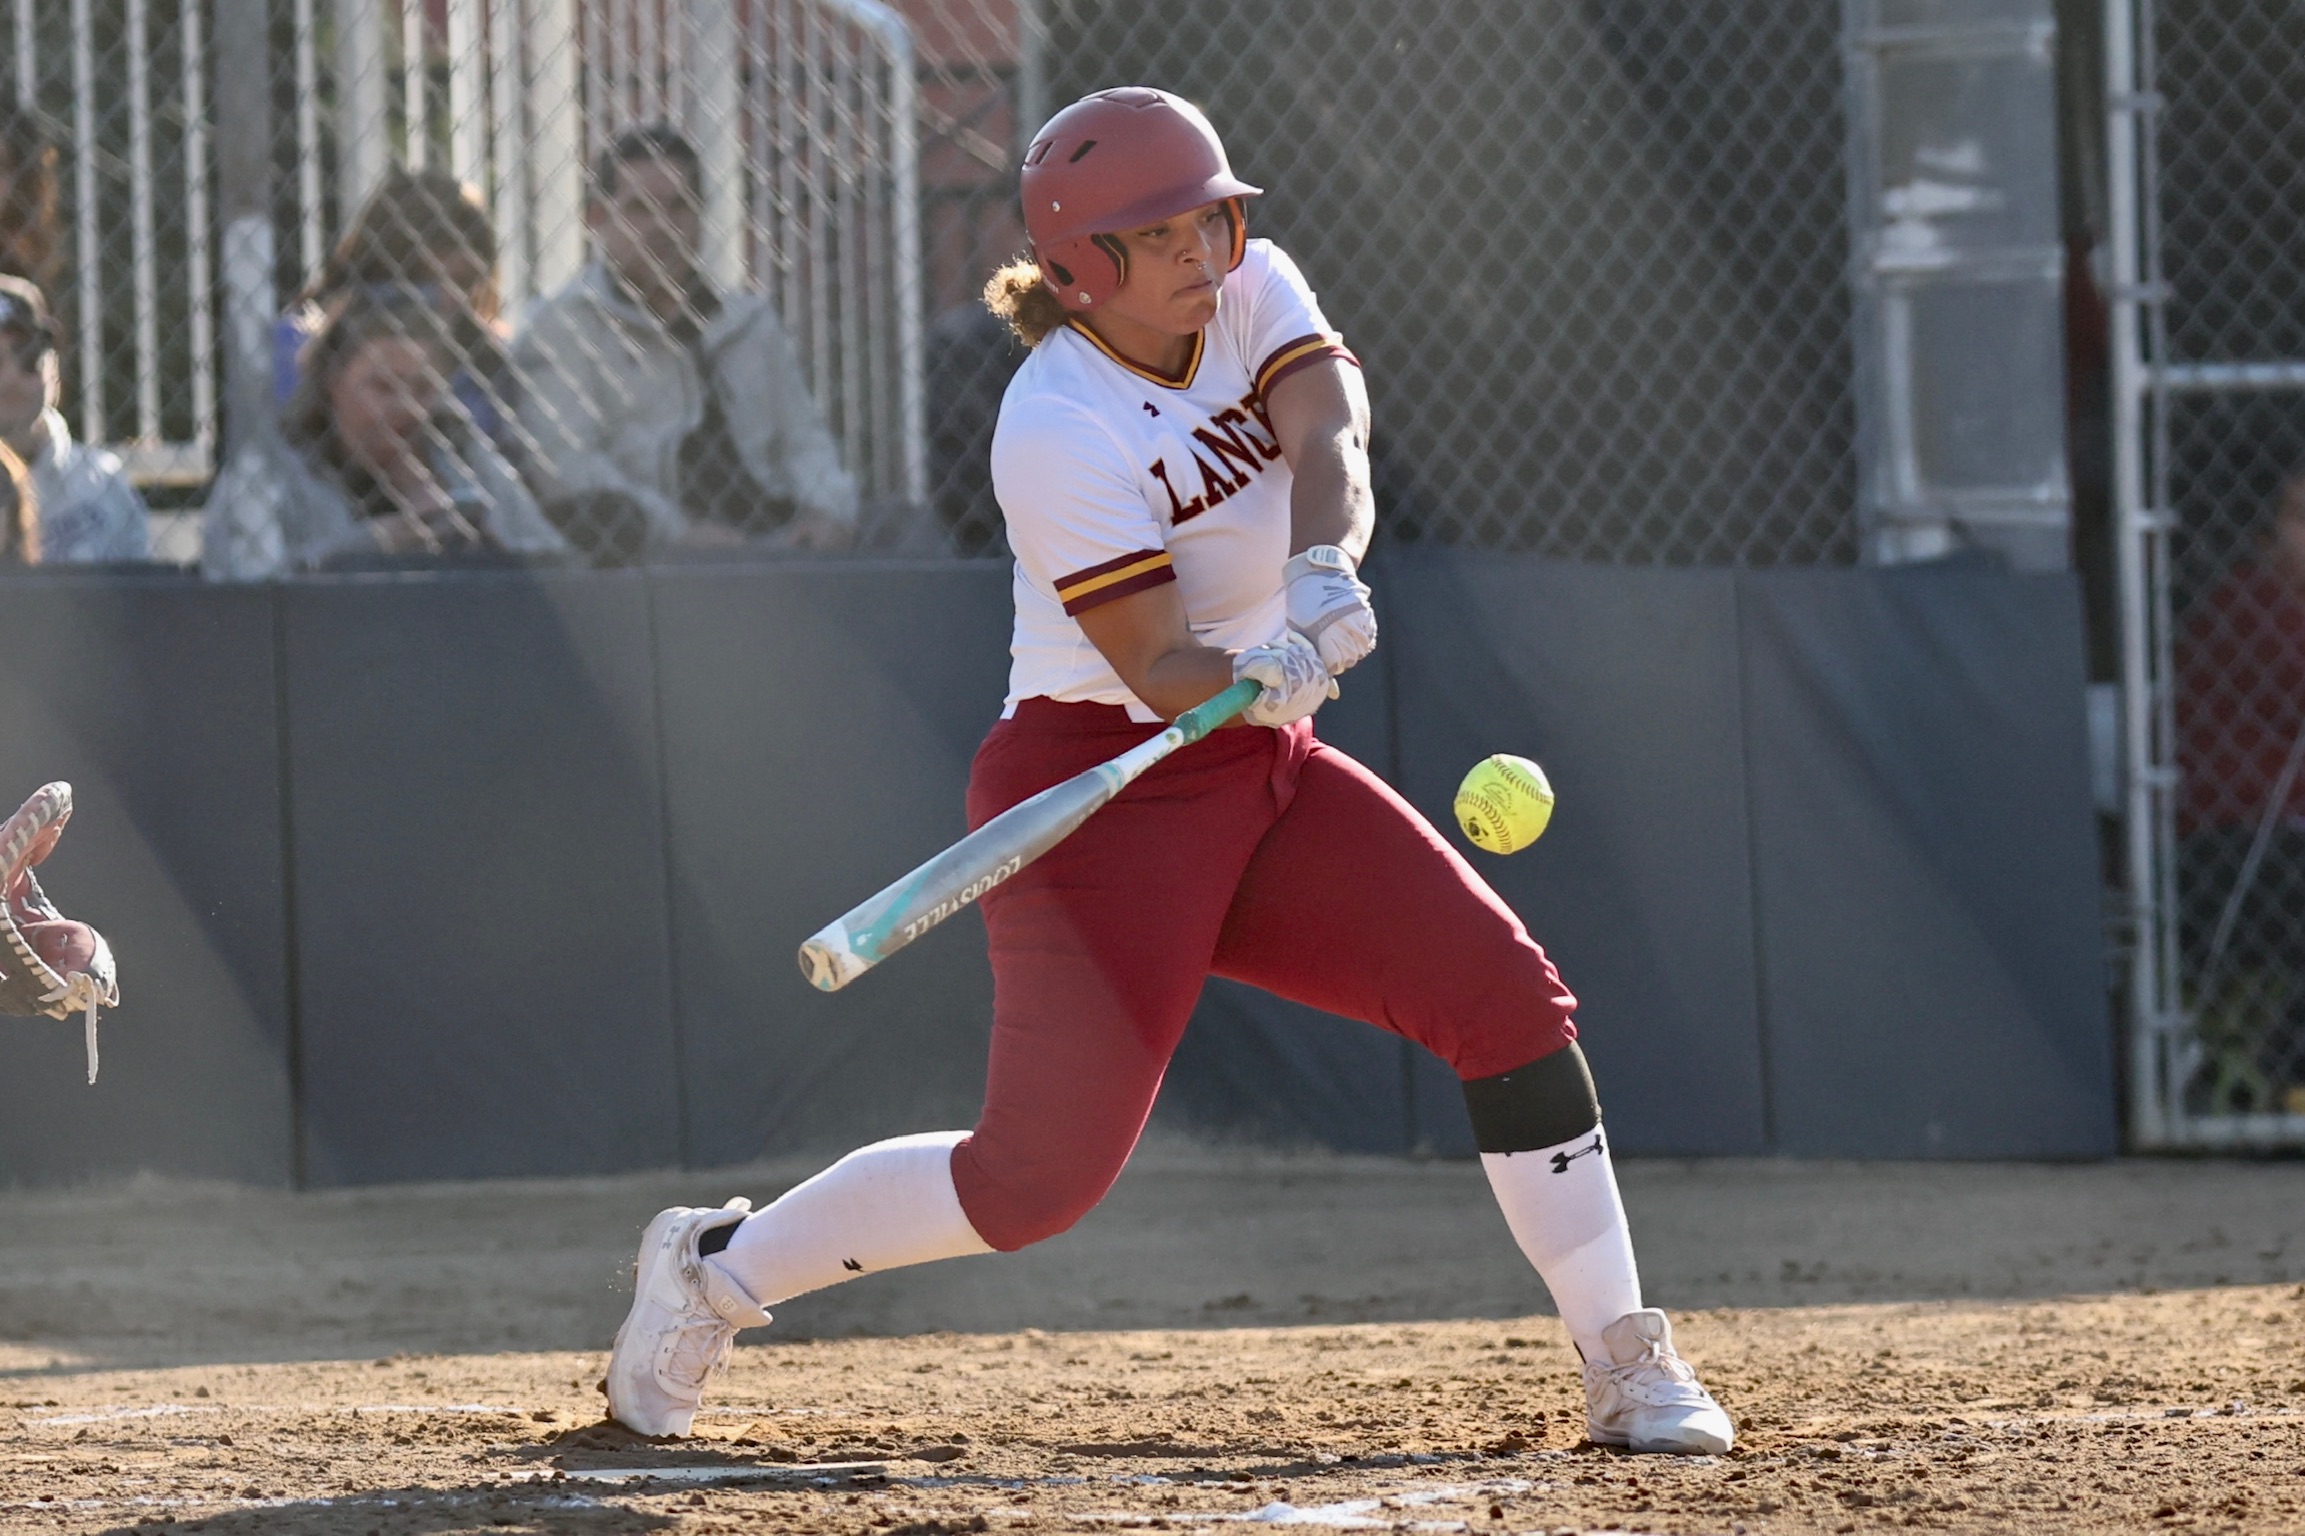 Jaime Harris connects on one of PCC's 13 hits in the team's home-opening victory on Wednesday (photo by Michael Watkins)